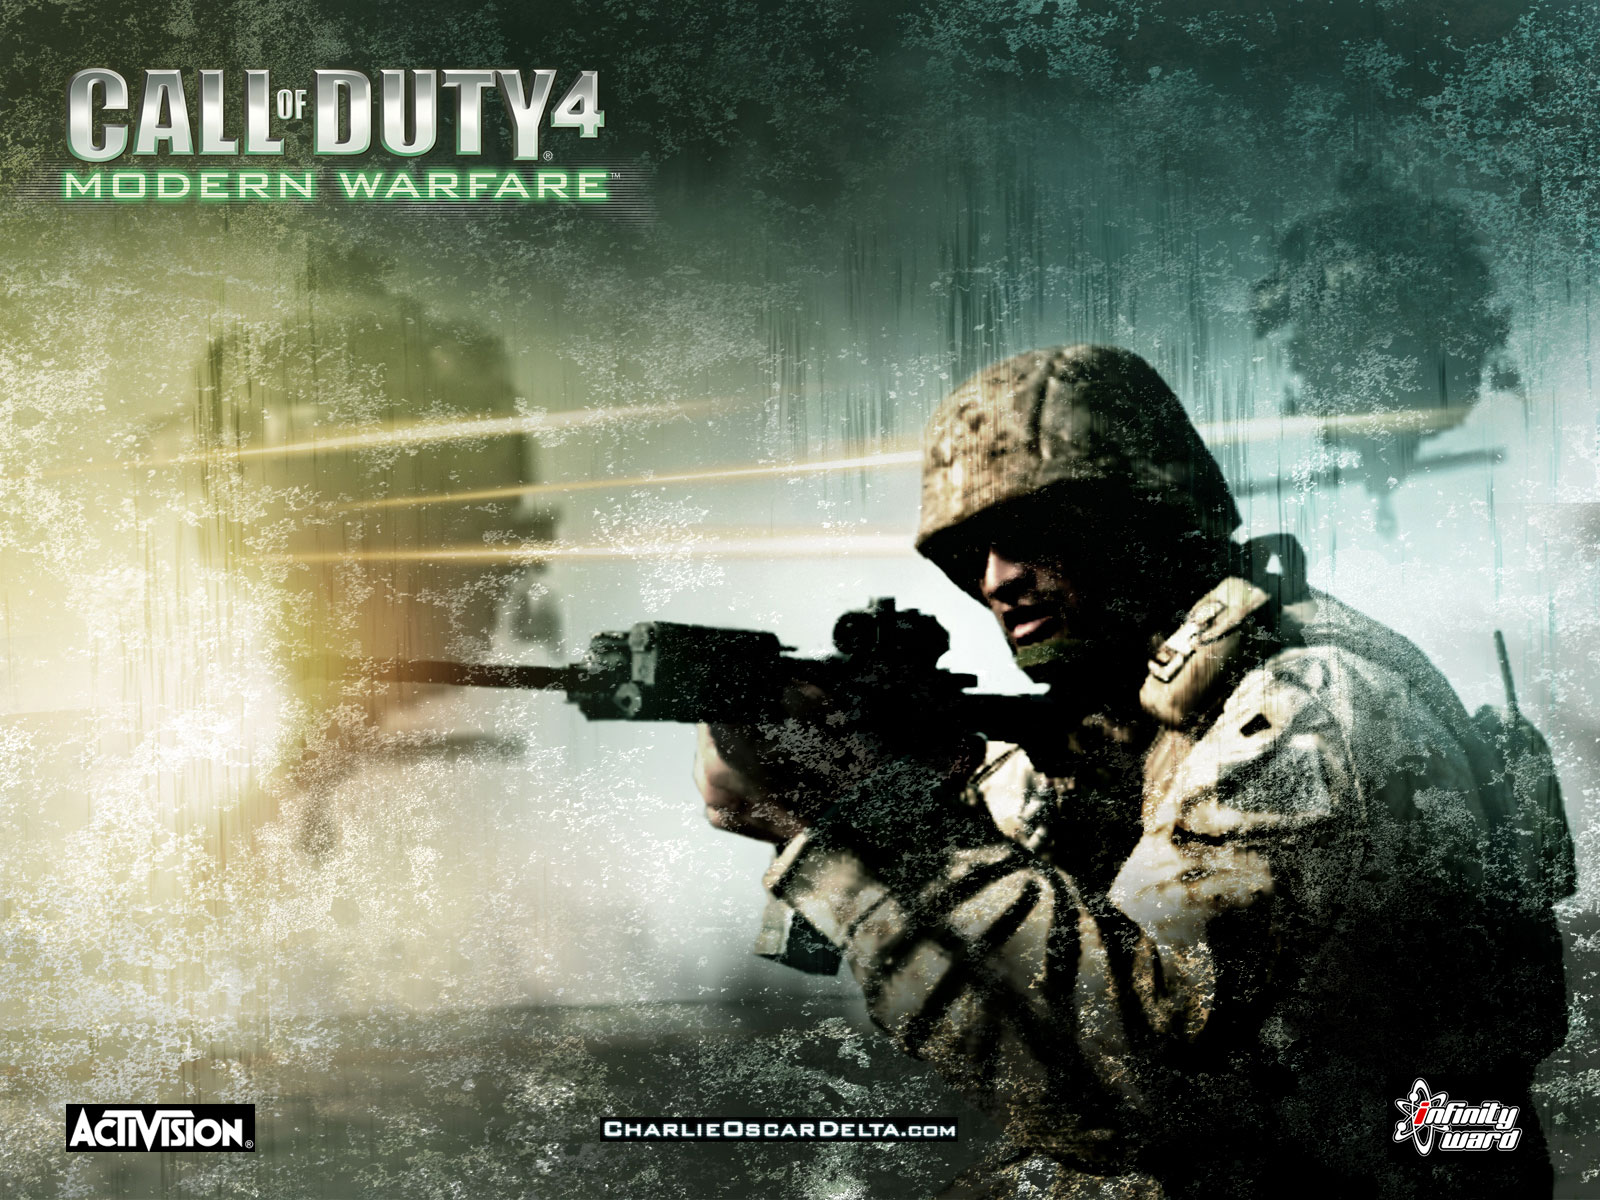 Call of Duty 4 Wallpapers. March 16, 2008